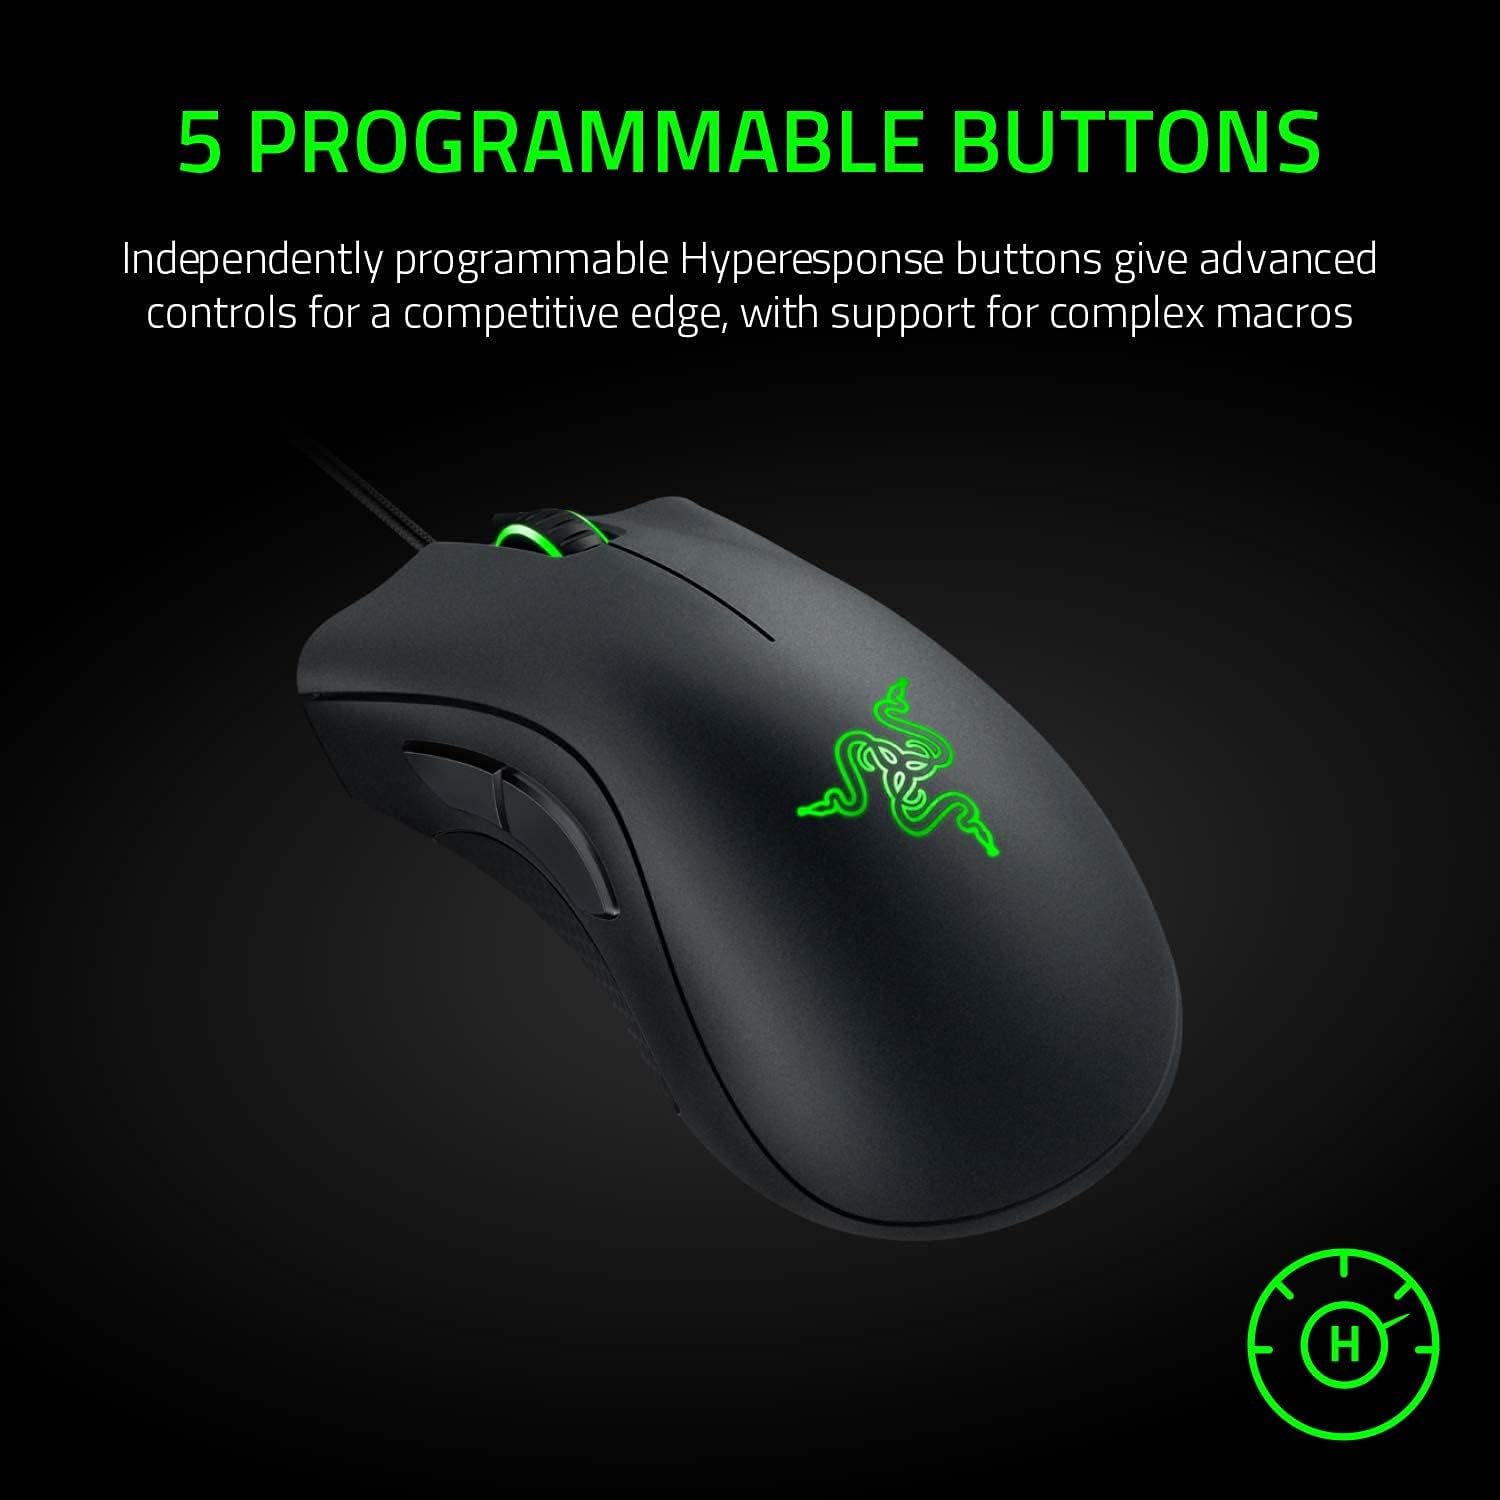 Razer DeathAdder Essential Gaming Mouse: 6400 DPI Optical Sensor - 5 Programmable Buttons - Mechanical Switches - Rubber Side Grips - Classic Black - Geek Tech